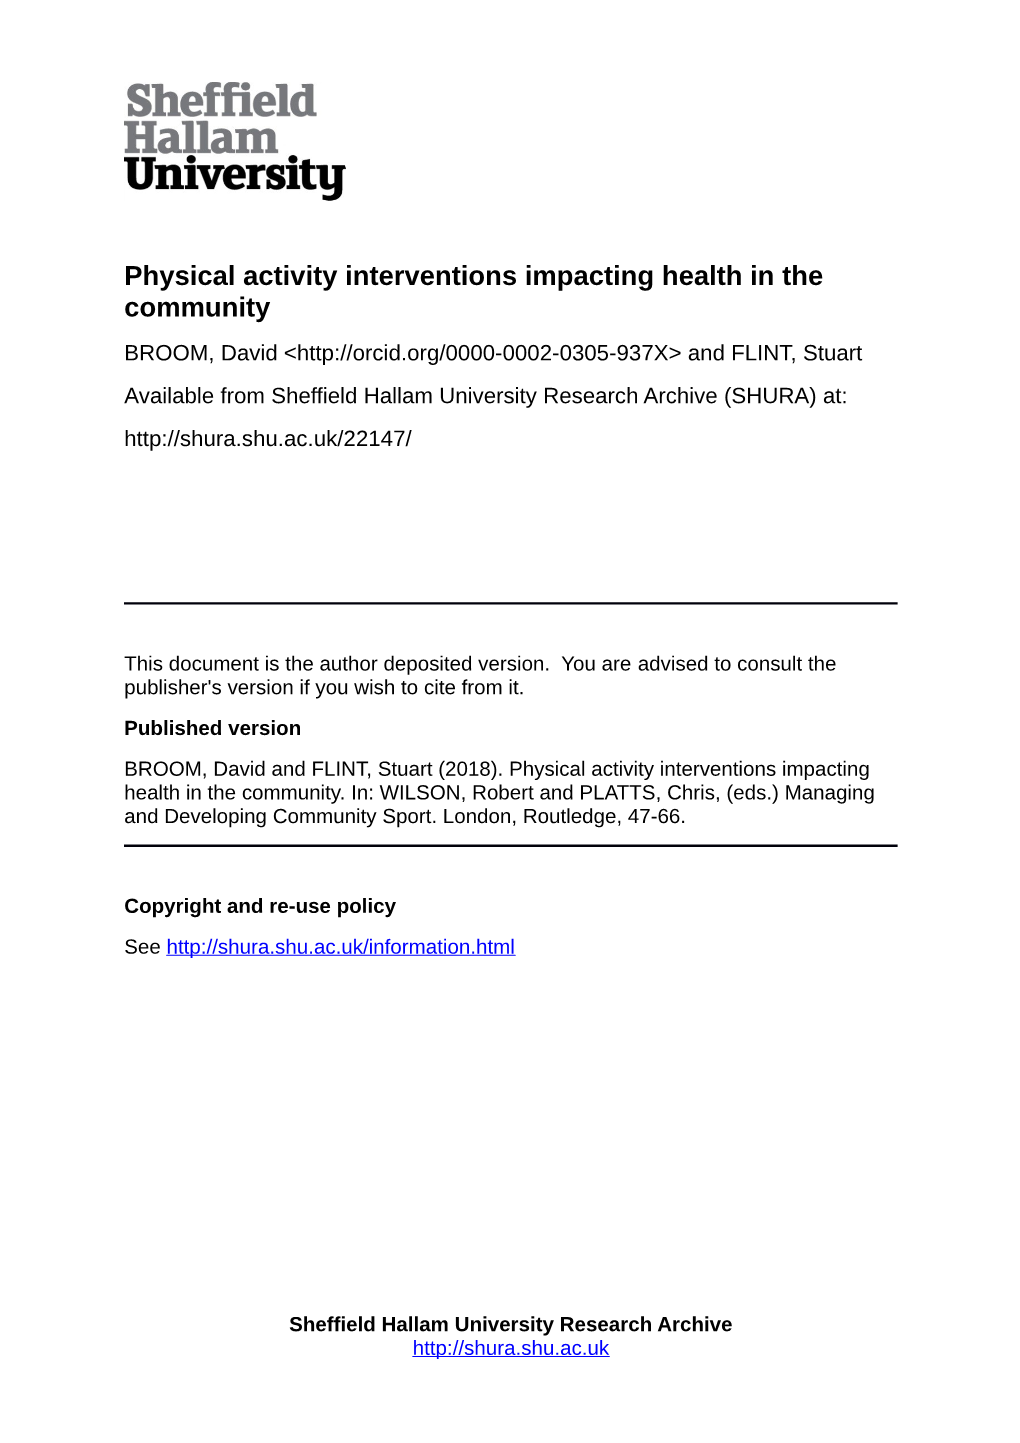 Physical Activity Interventions Impacting Health in the Community